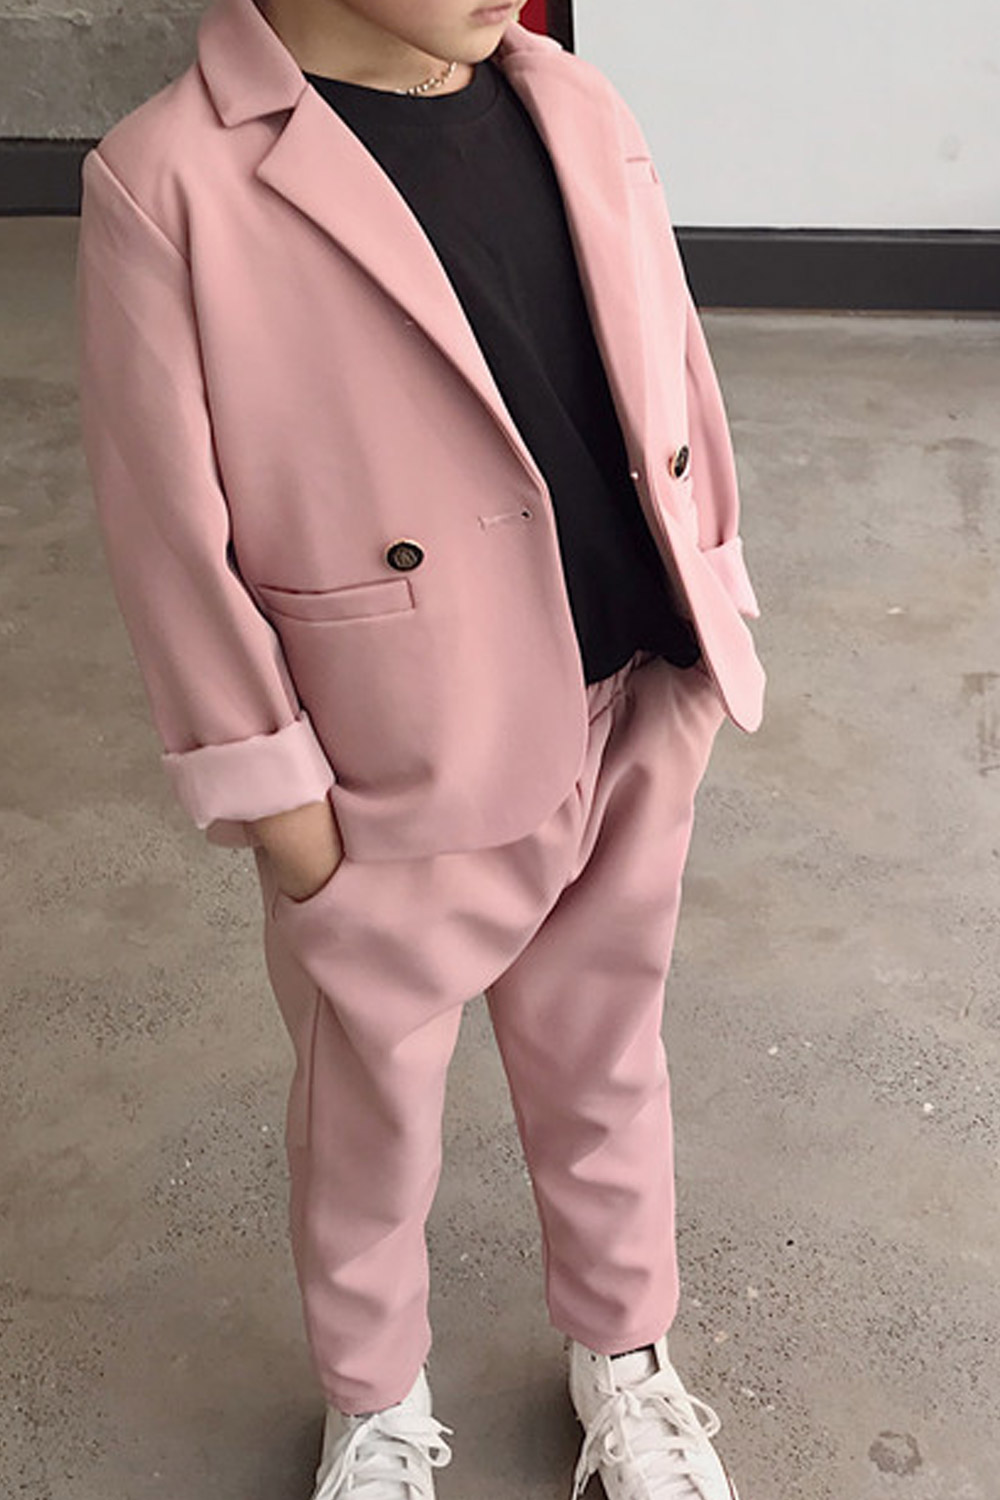 Selected Color is Pink Double-Breasted Trousers,